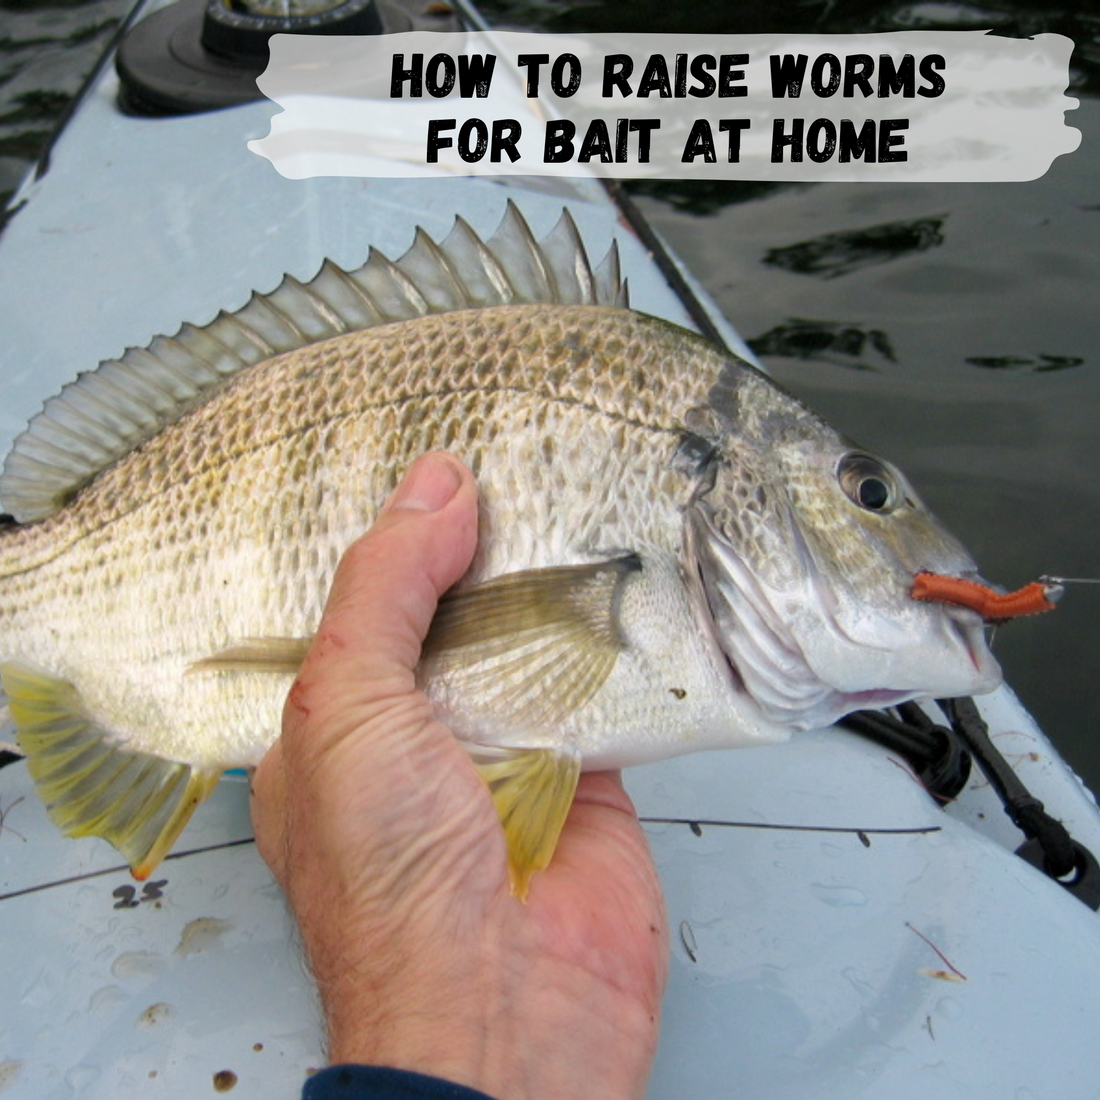 How to raise worms for bait at home – WormBucket